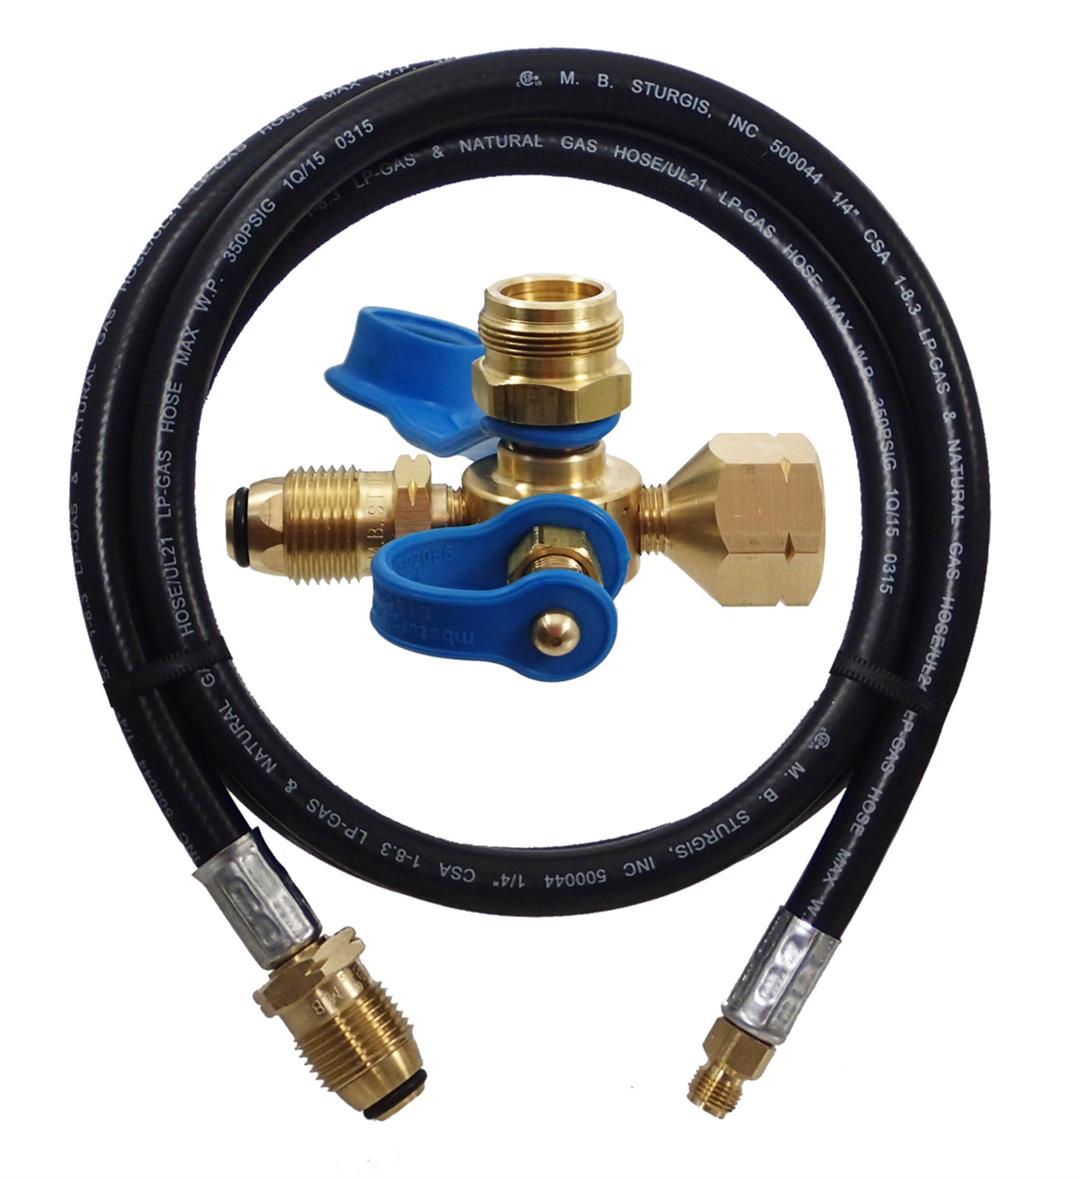 MB Sturgis Propane Hose Extend and Stay Kit